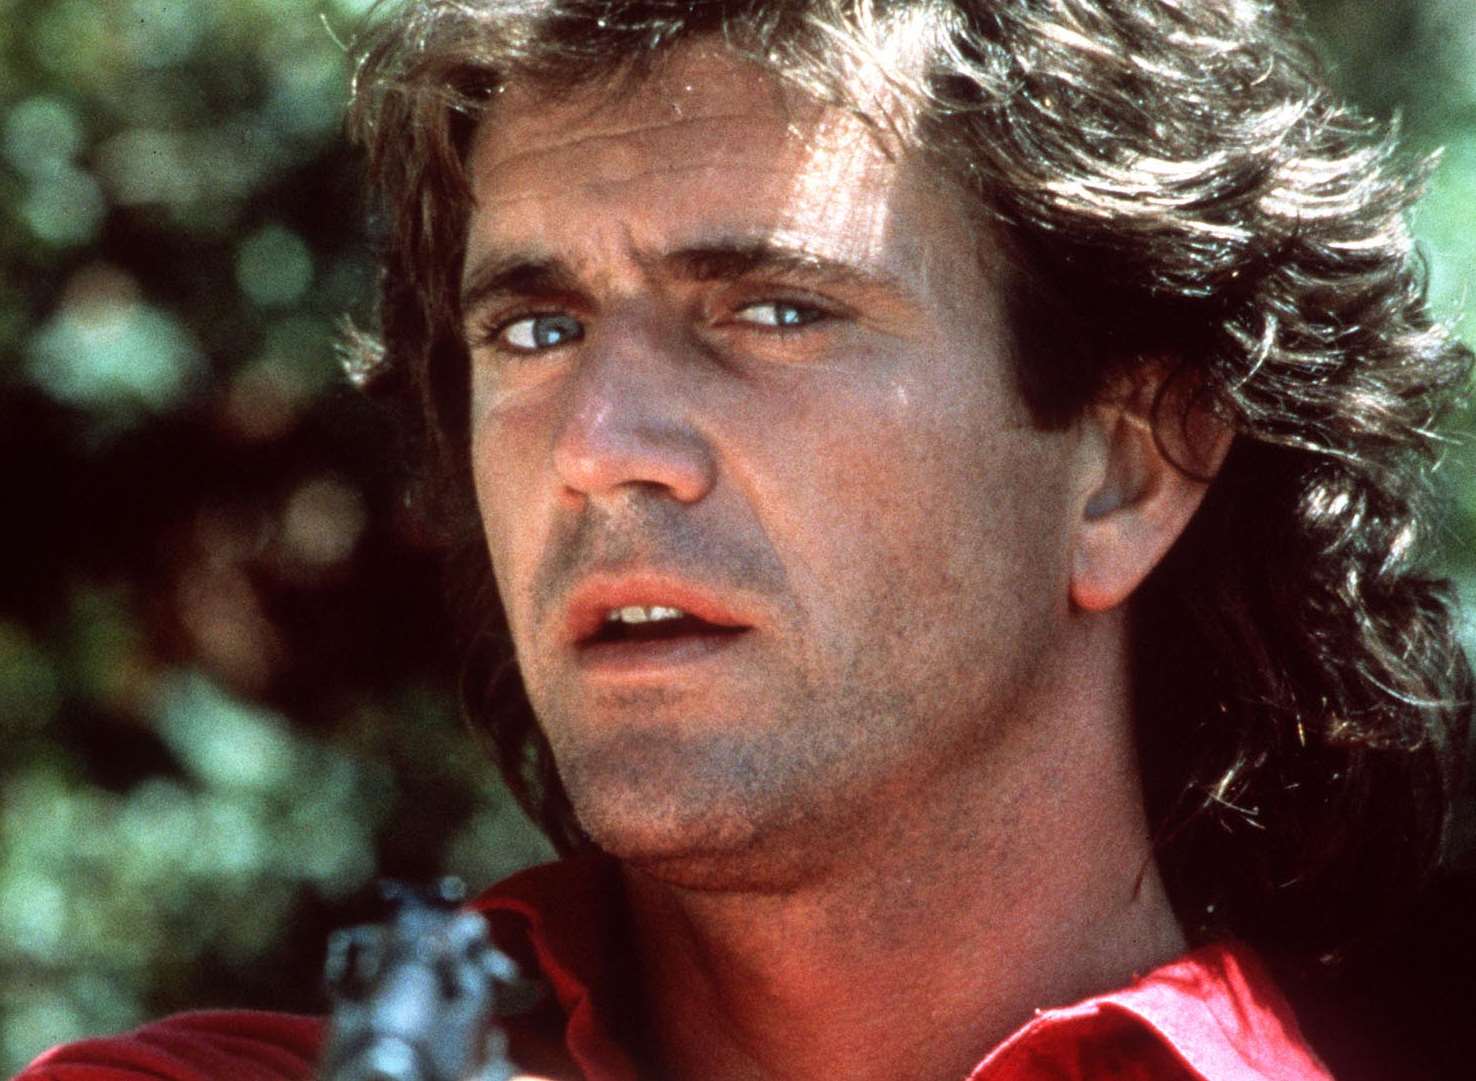 Lethal Weapon starred Mel Gibson